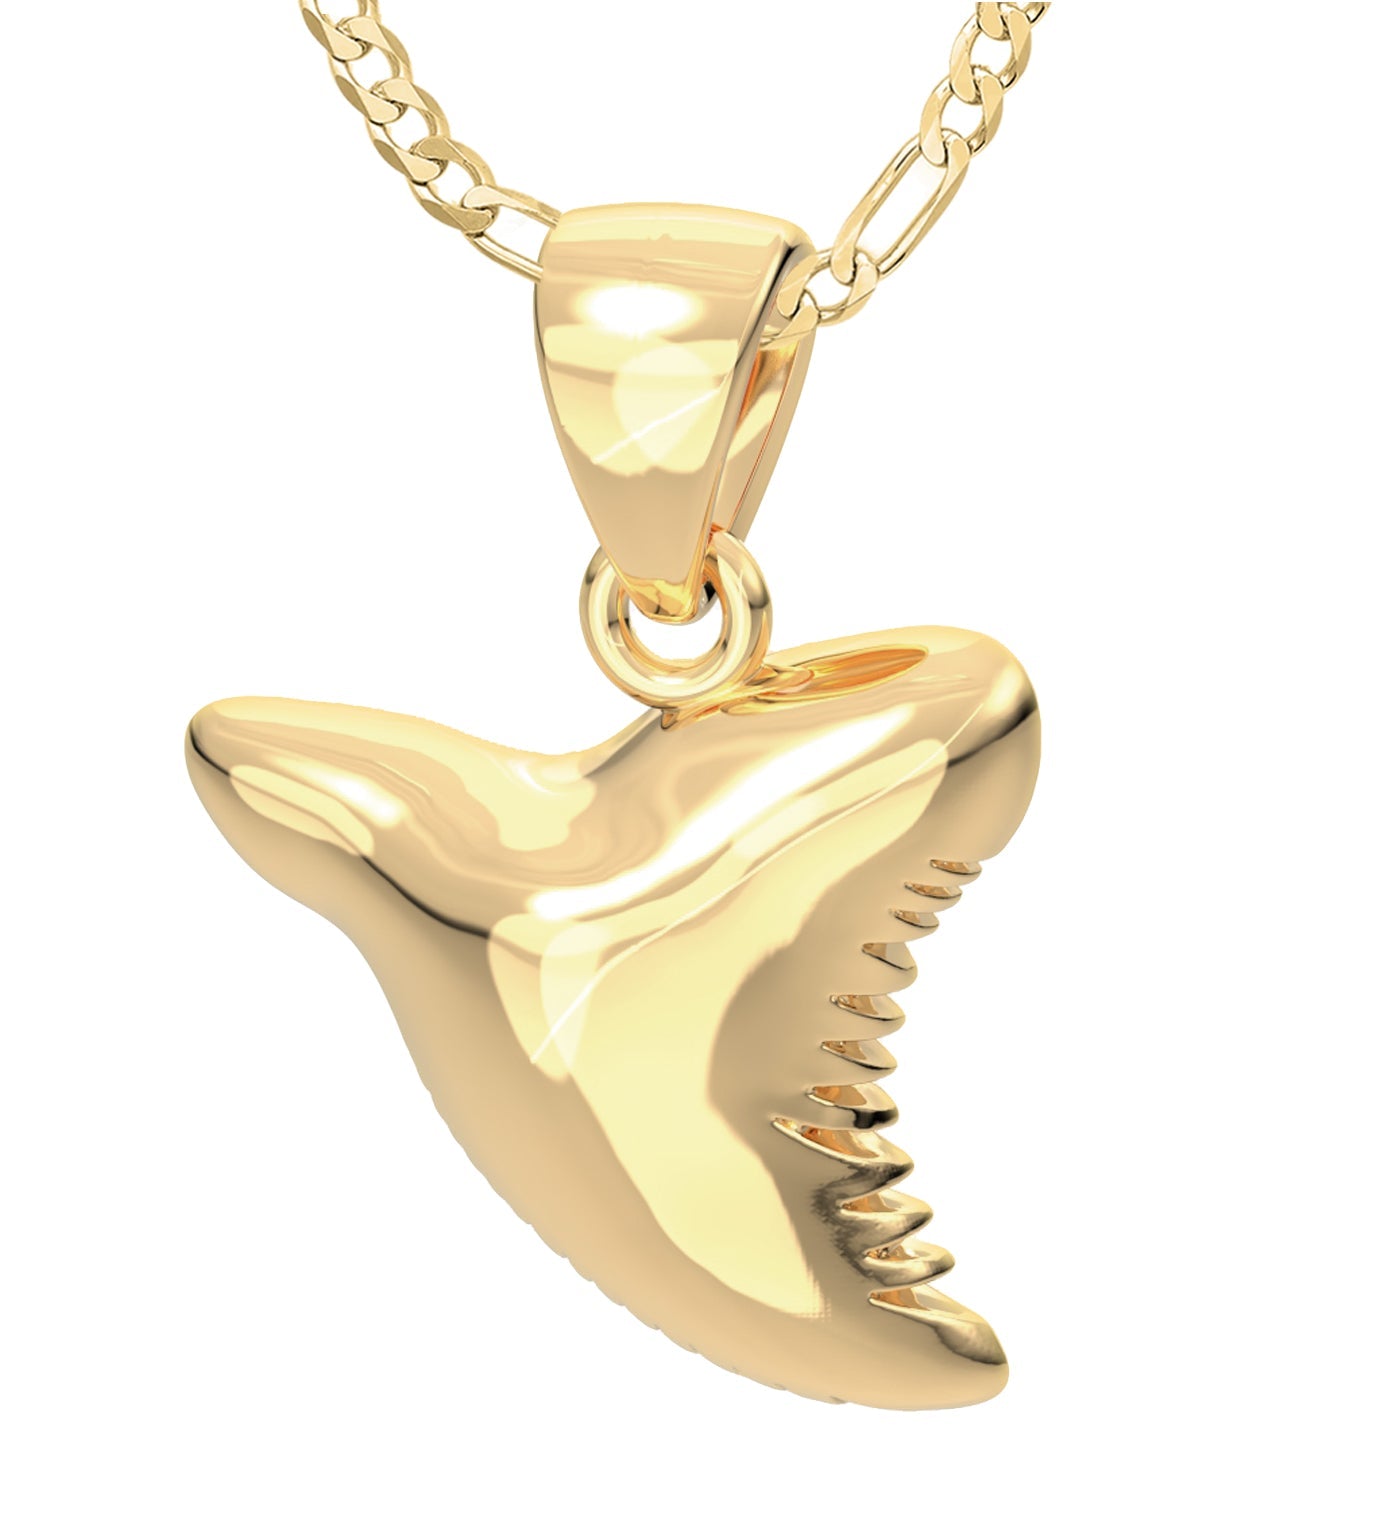 18K Gold Plated Necklace - Full Paved CZ Diamond Pendant -Iced Out Sha –  peardedesign.com